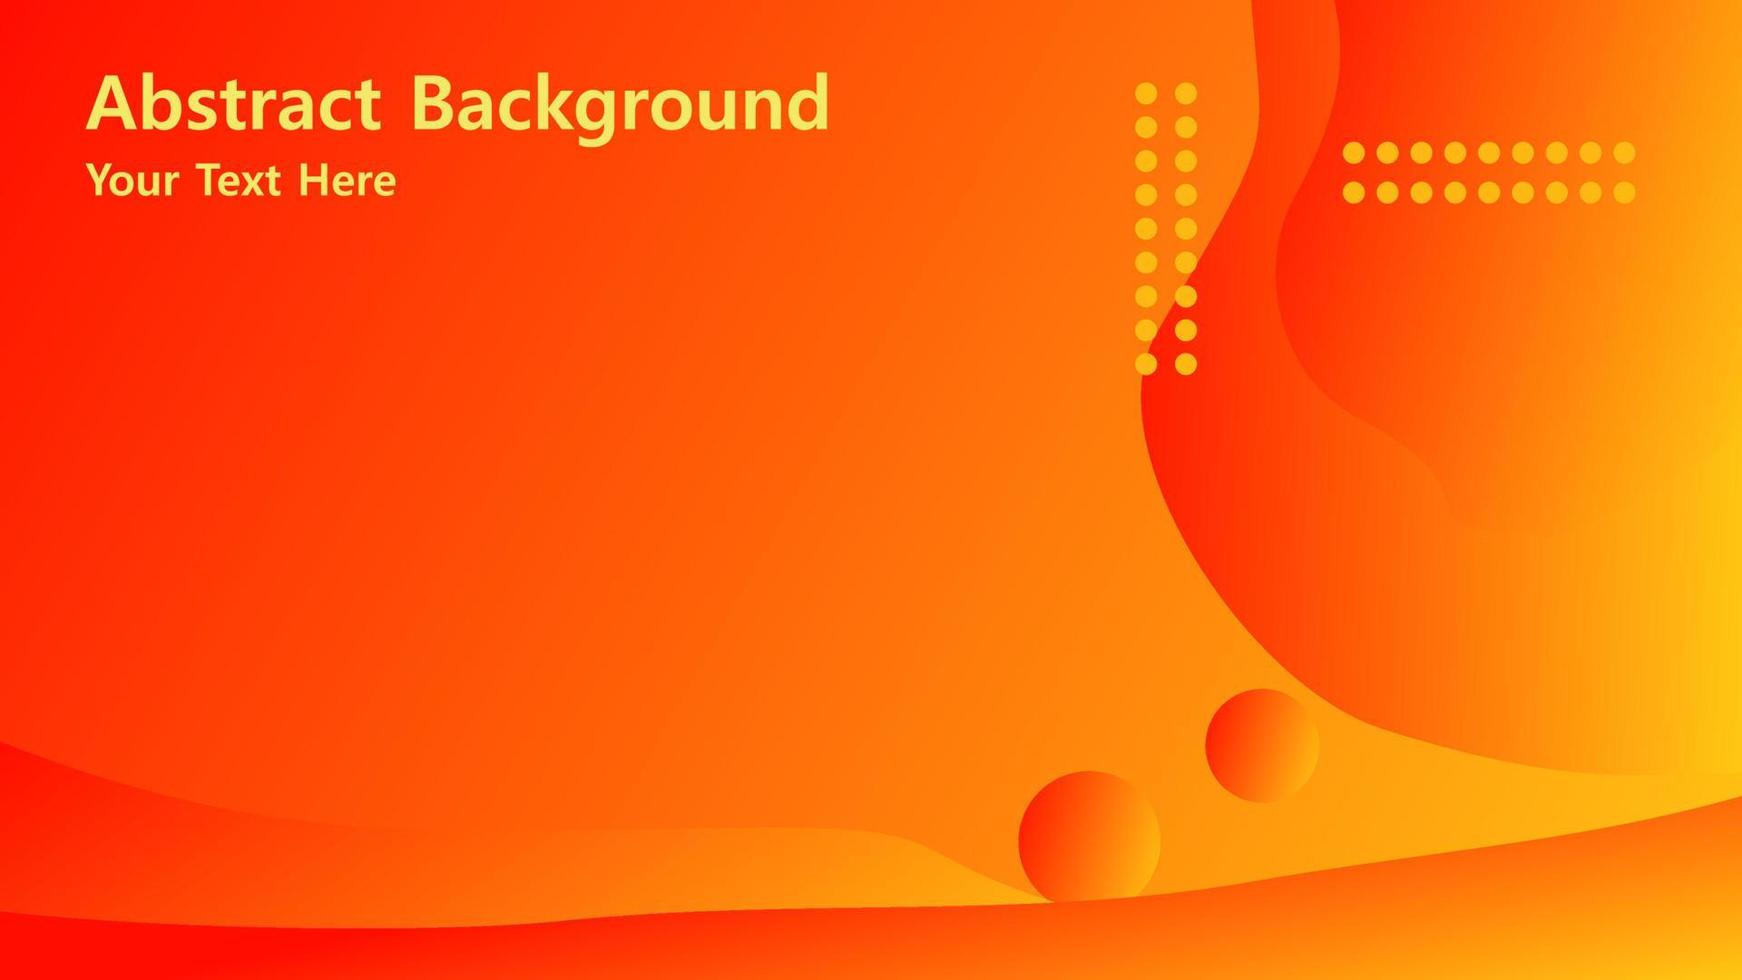 Abstract background. Orange elements with fluid gradient. Dynamic shapes composition. Eps10 vector